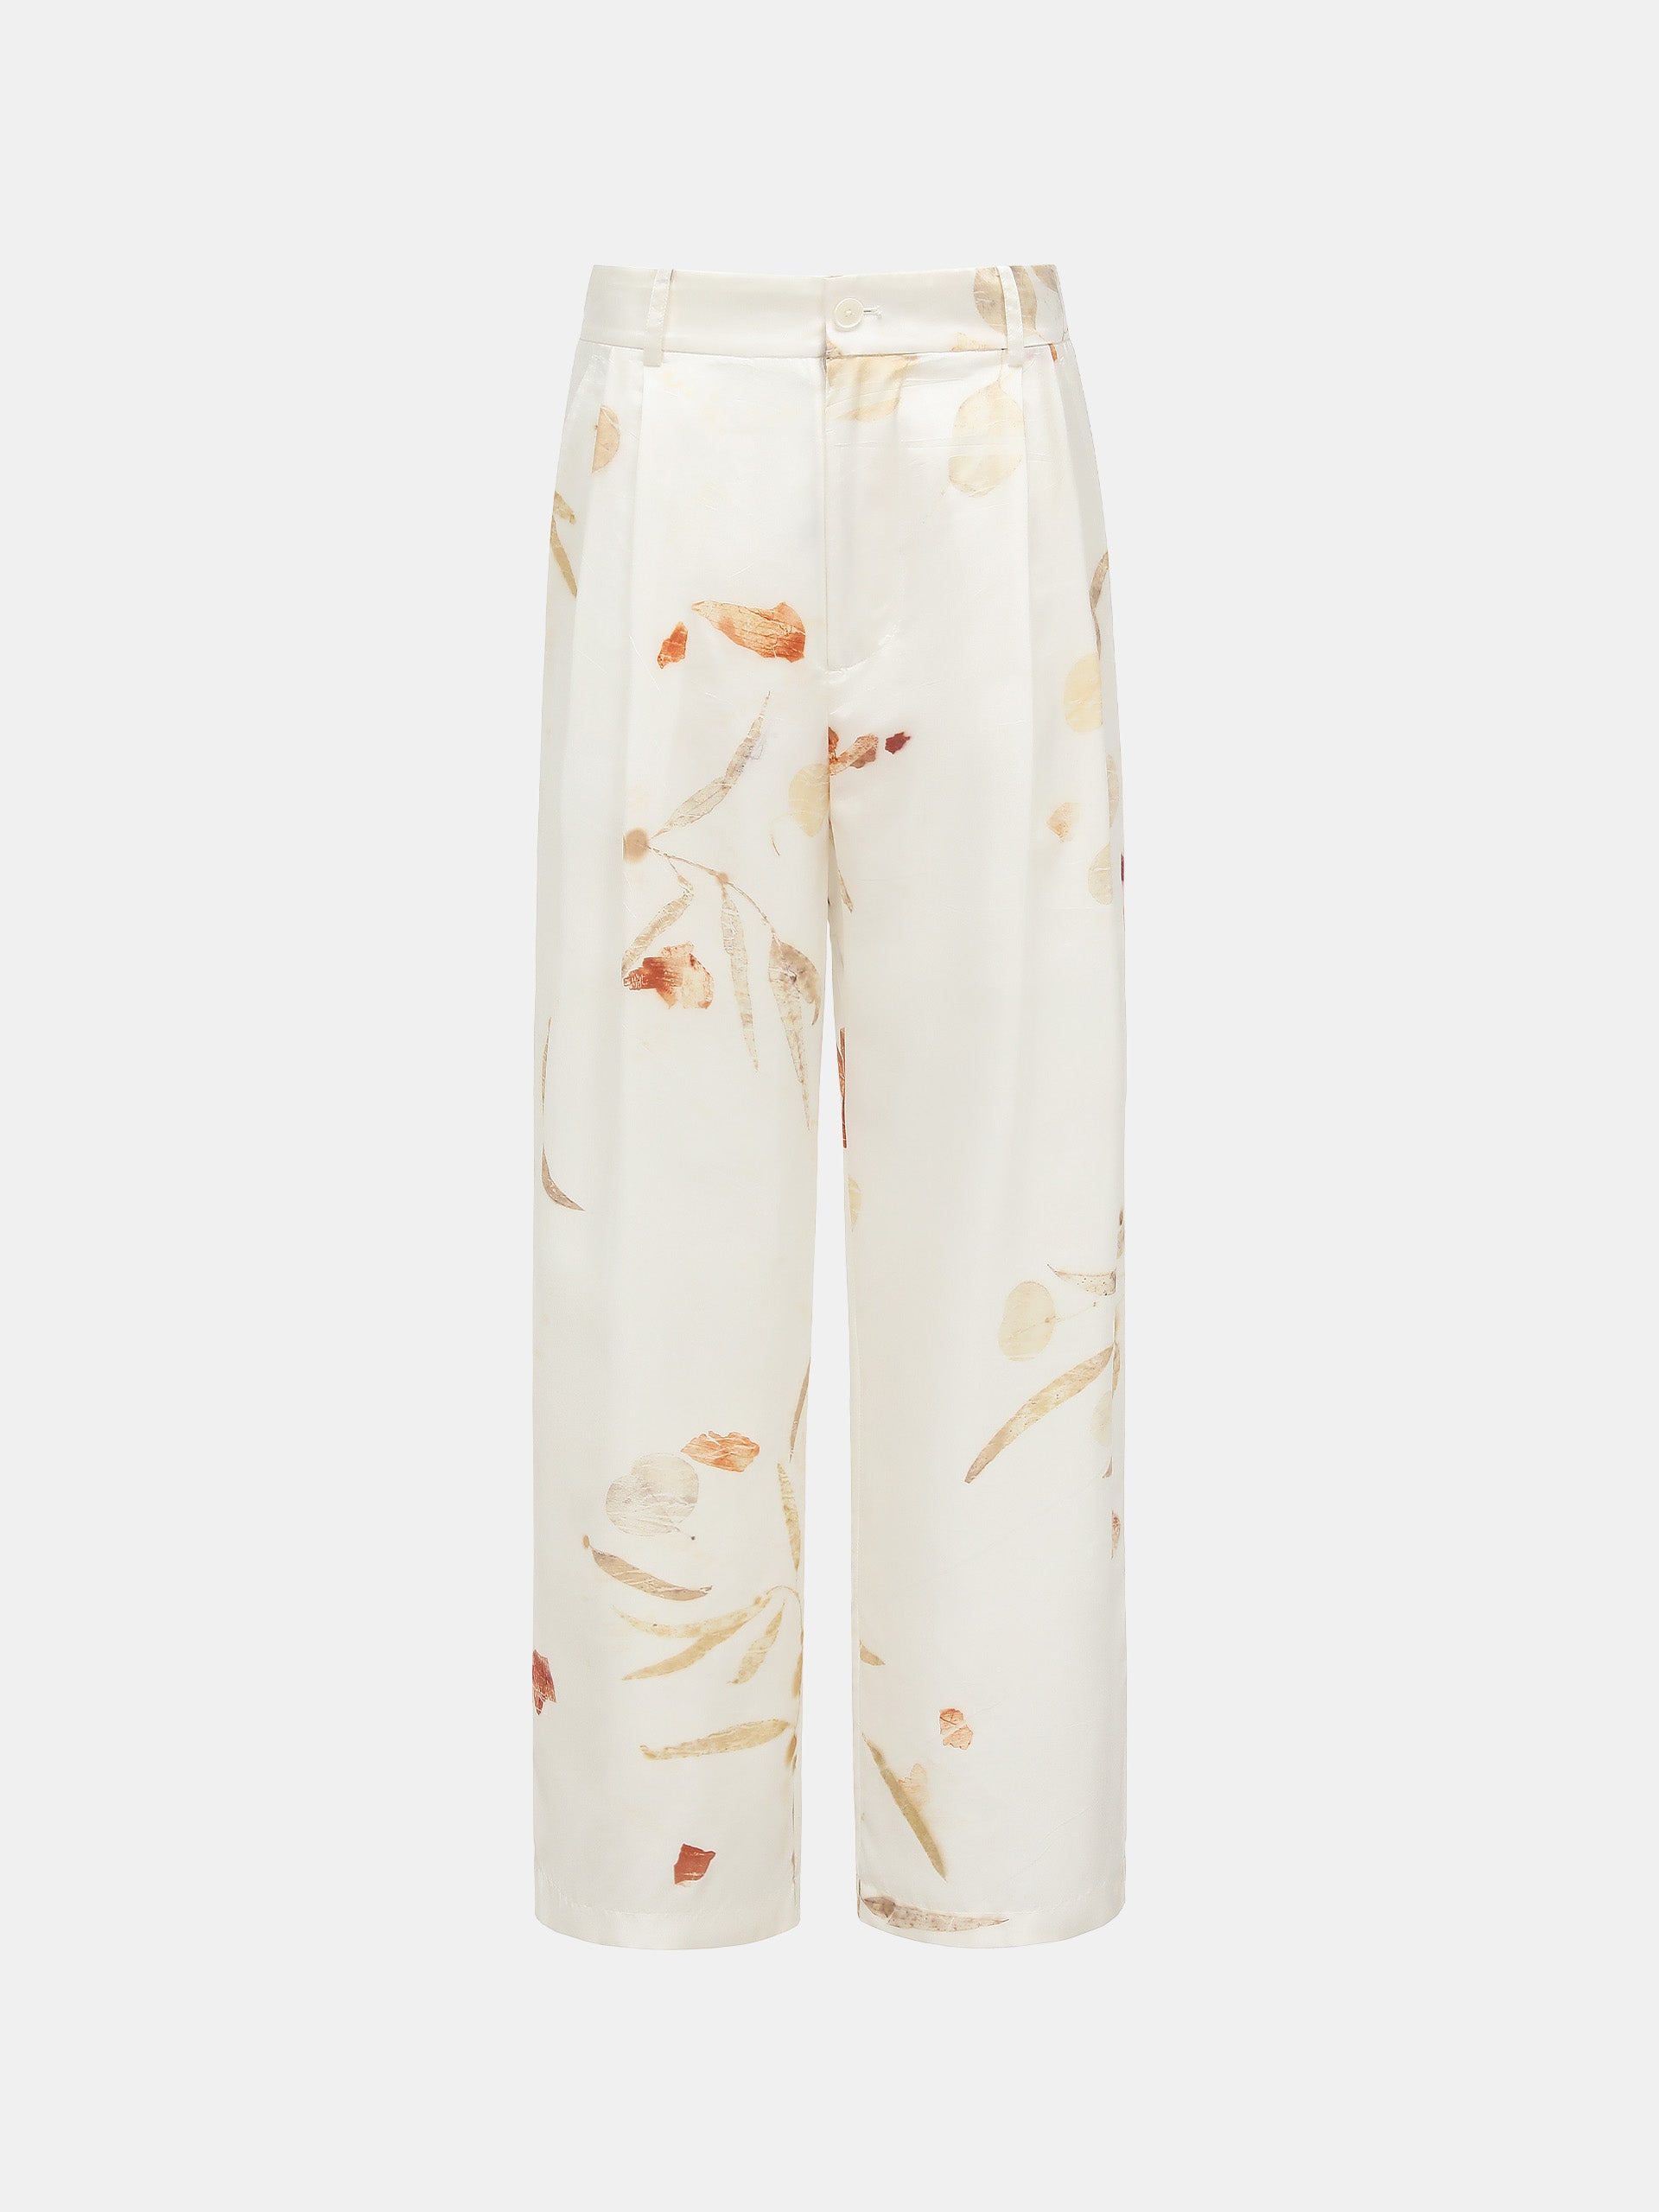 PLANT DYED SILK TROUSER